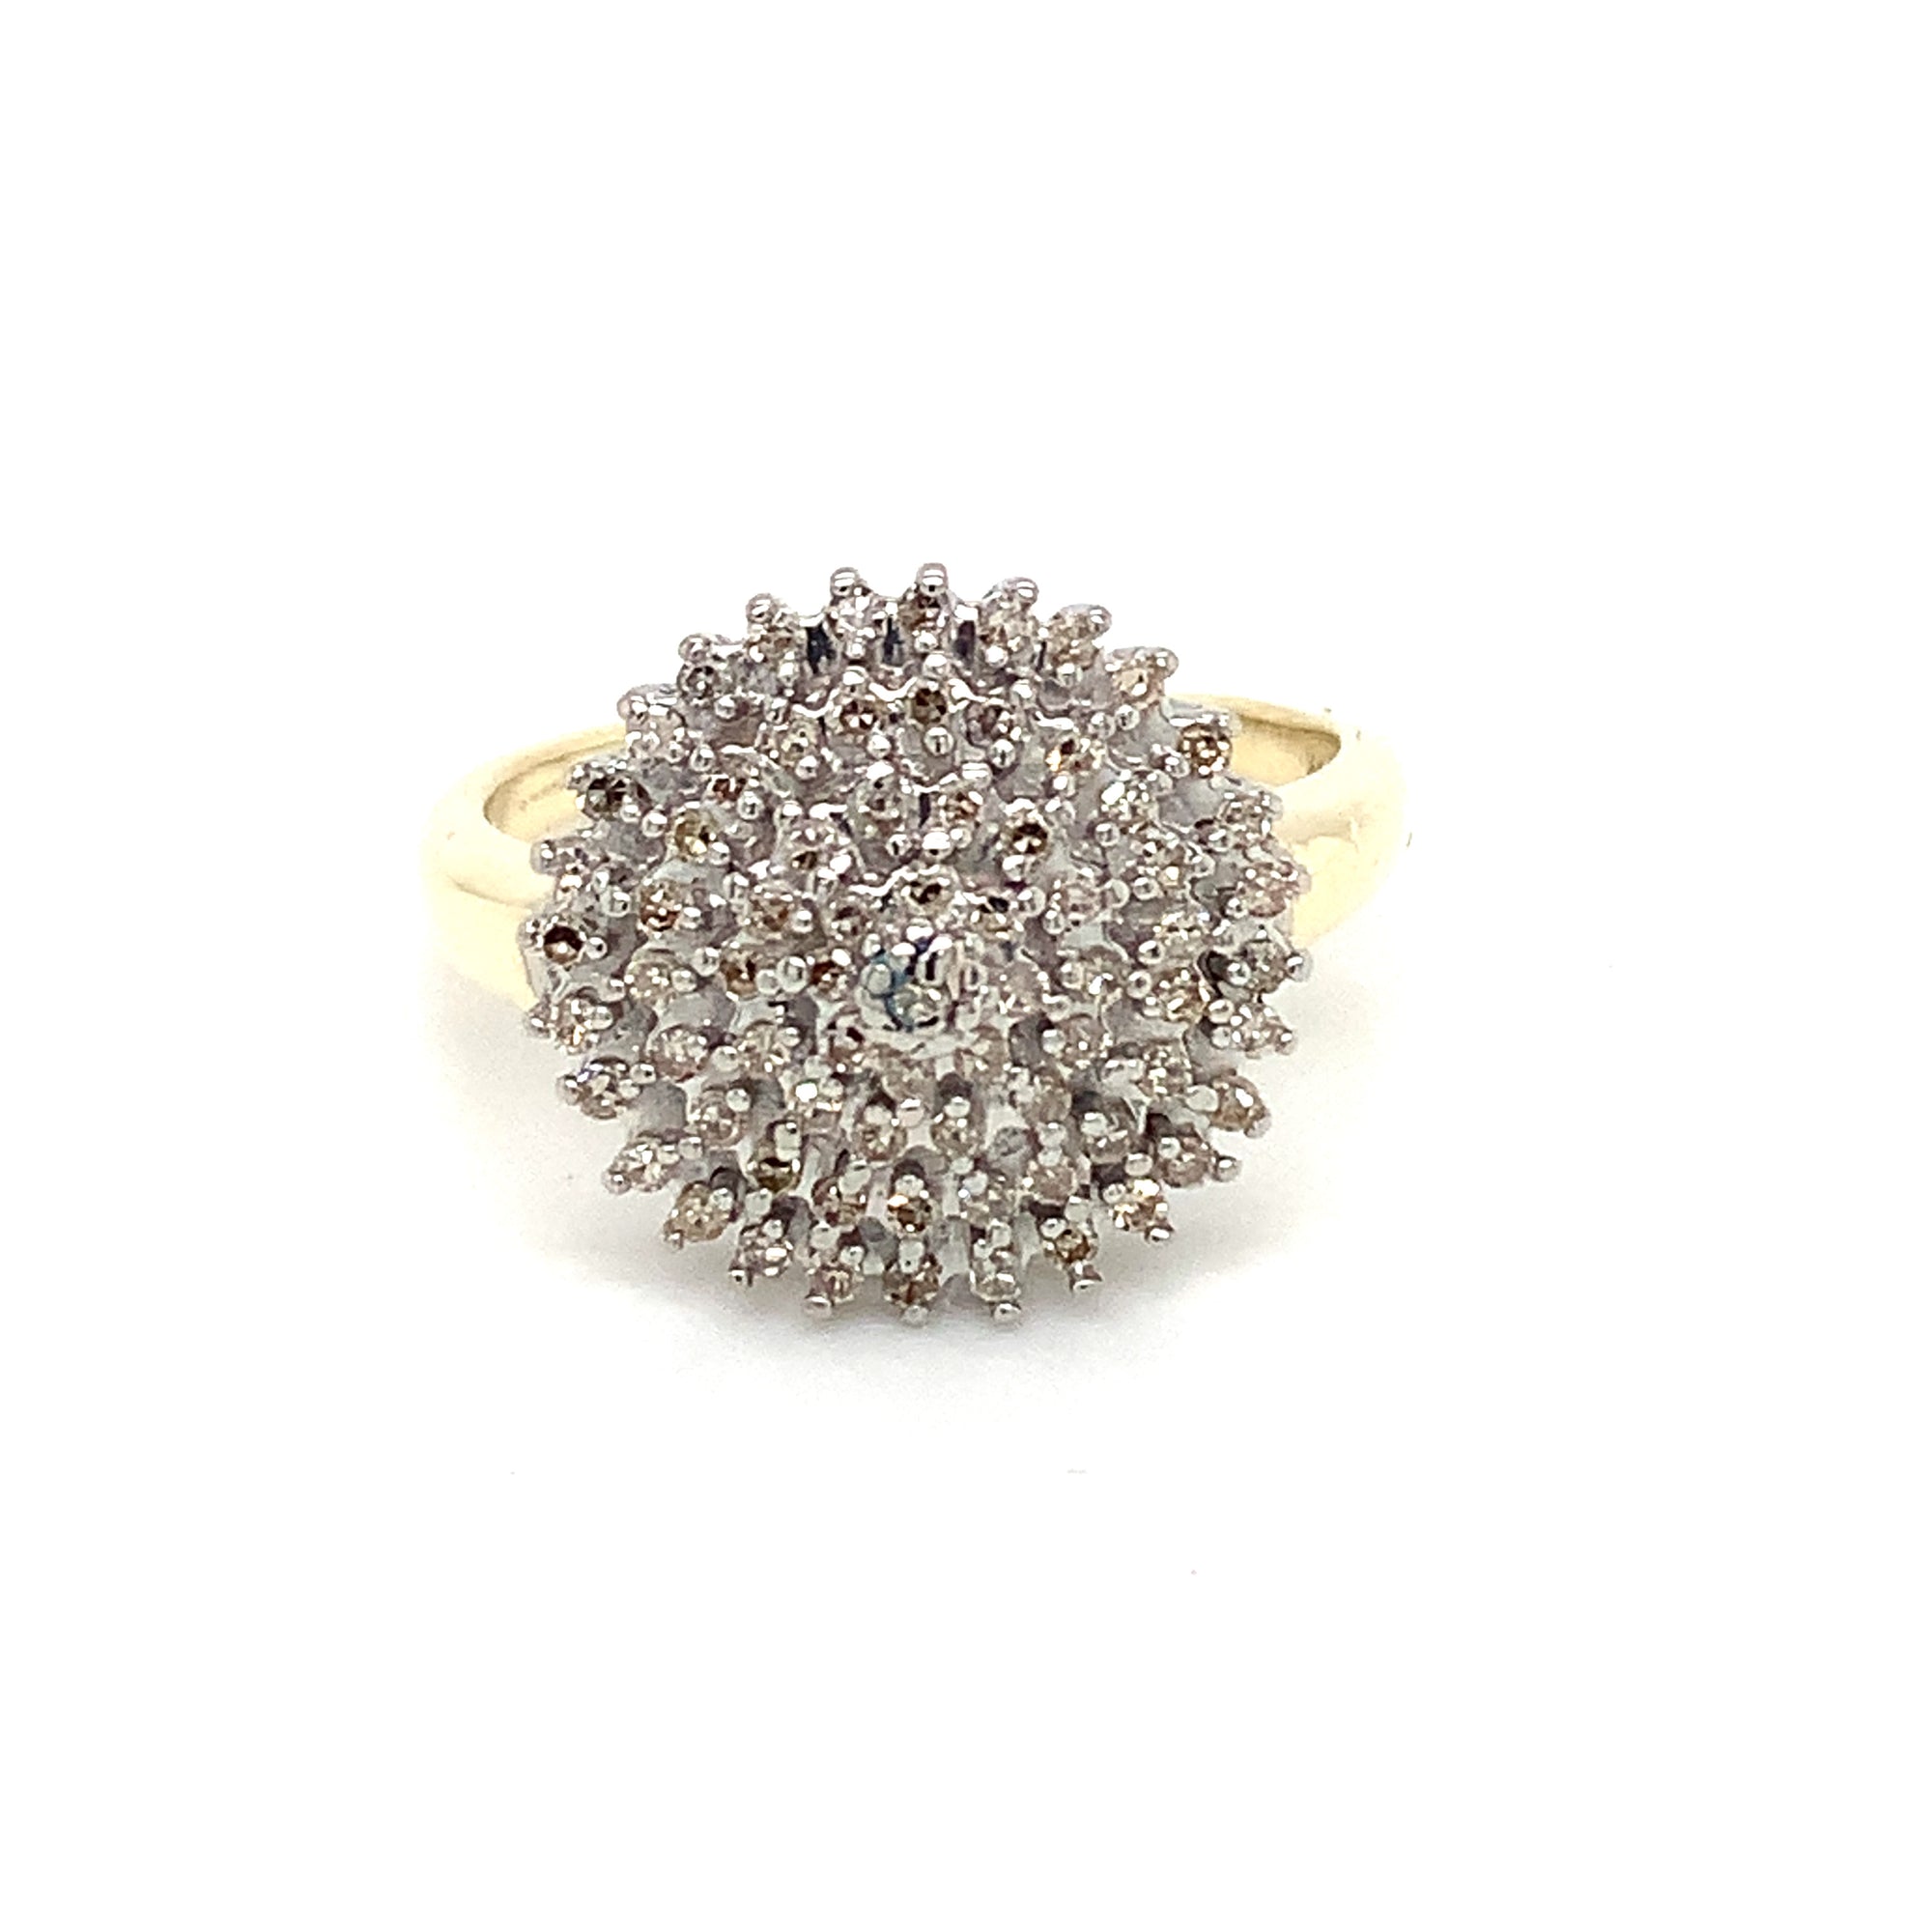 Diamond Cluster Ring in 9ct Yellow Gold